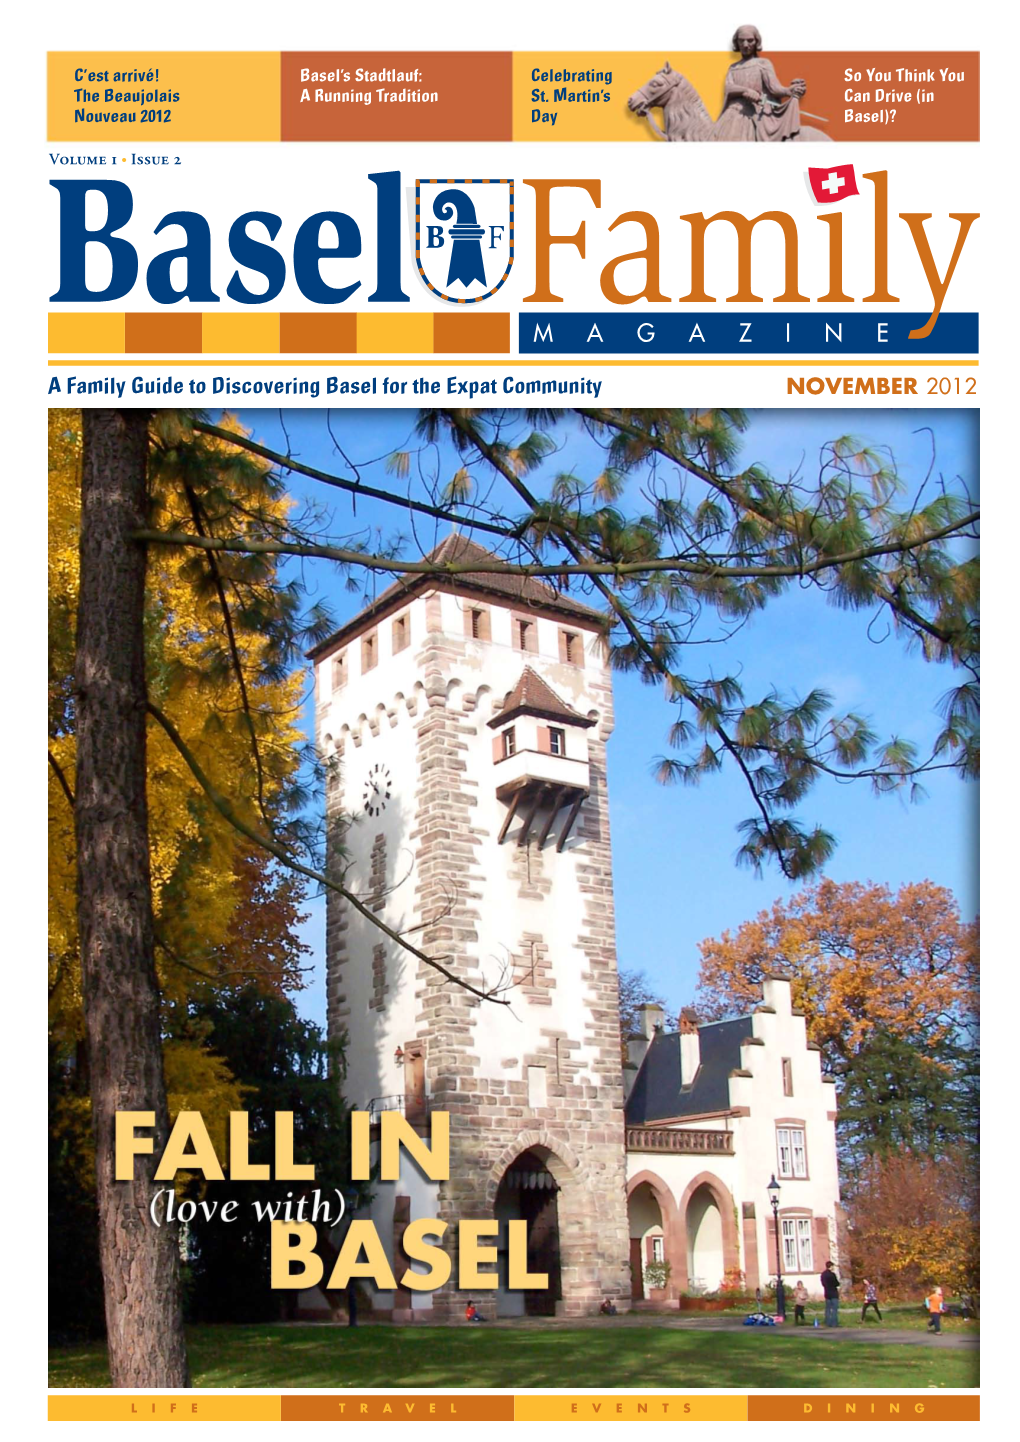 Basel Family Magazine Want to Thank You for the Overwhelmingly Positive Response That You Have Given Us Following the Launch of Our Magazine Last Month